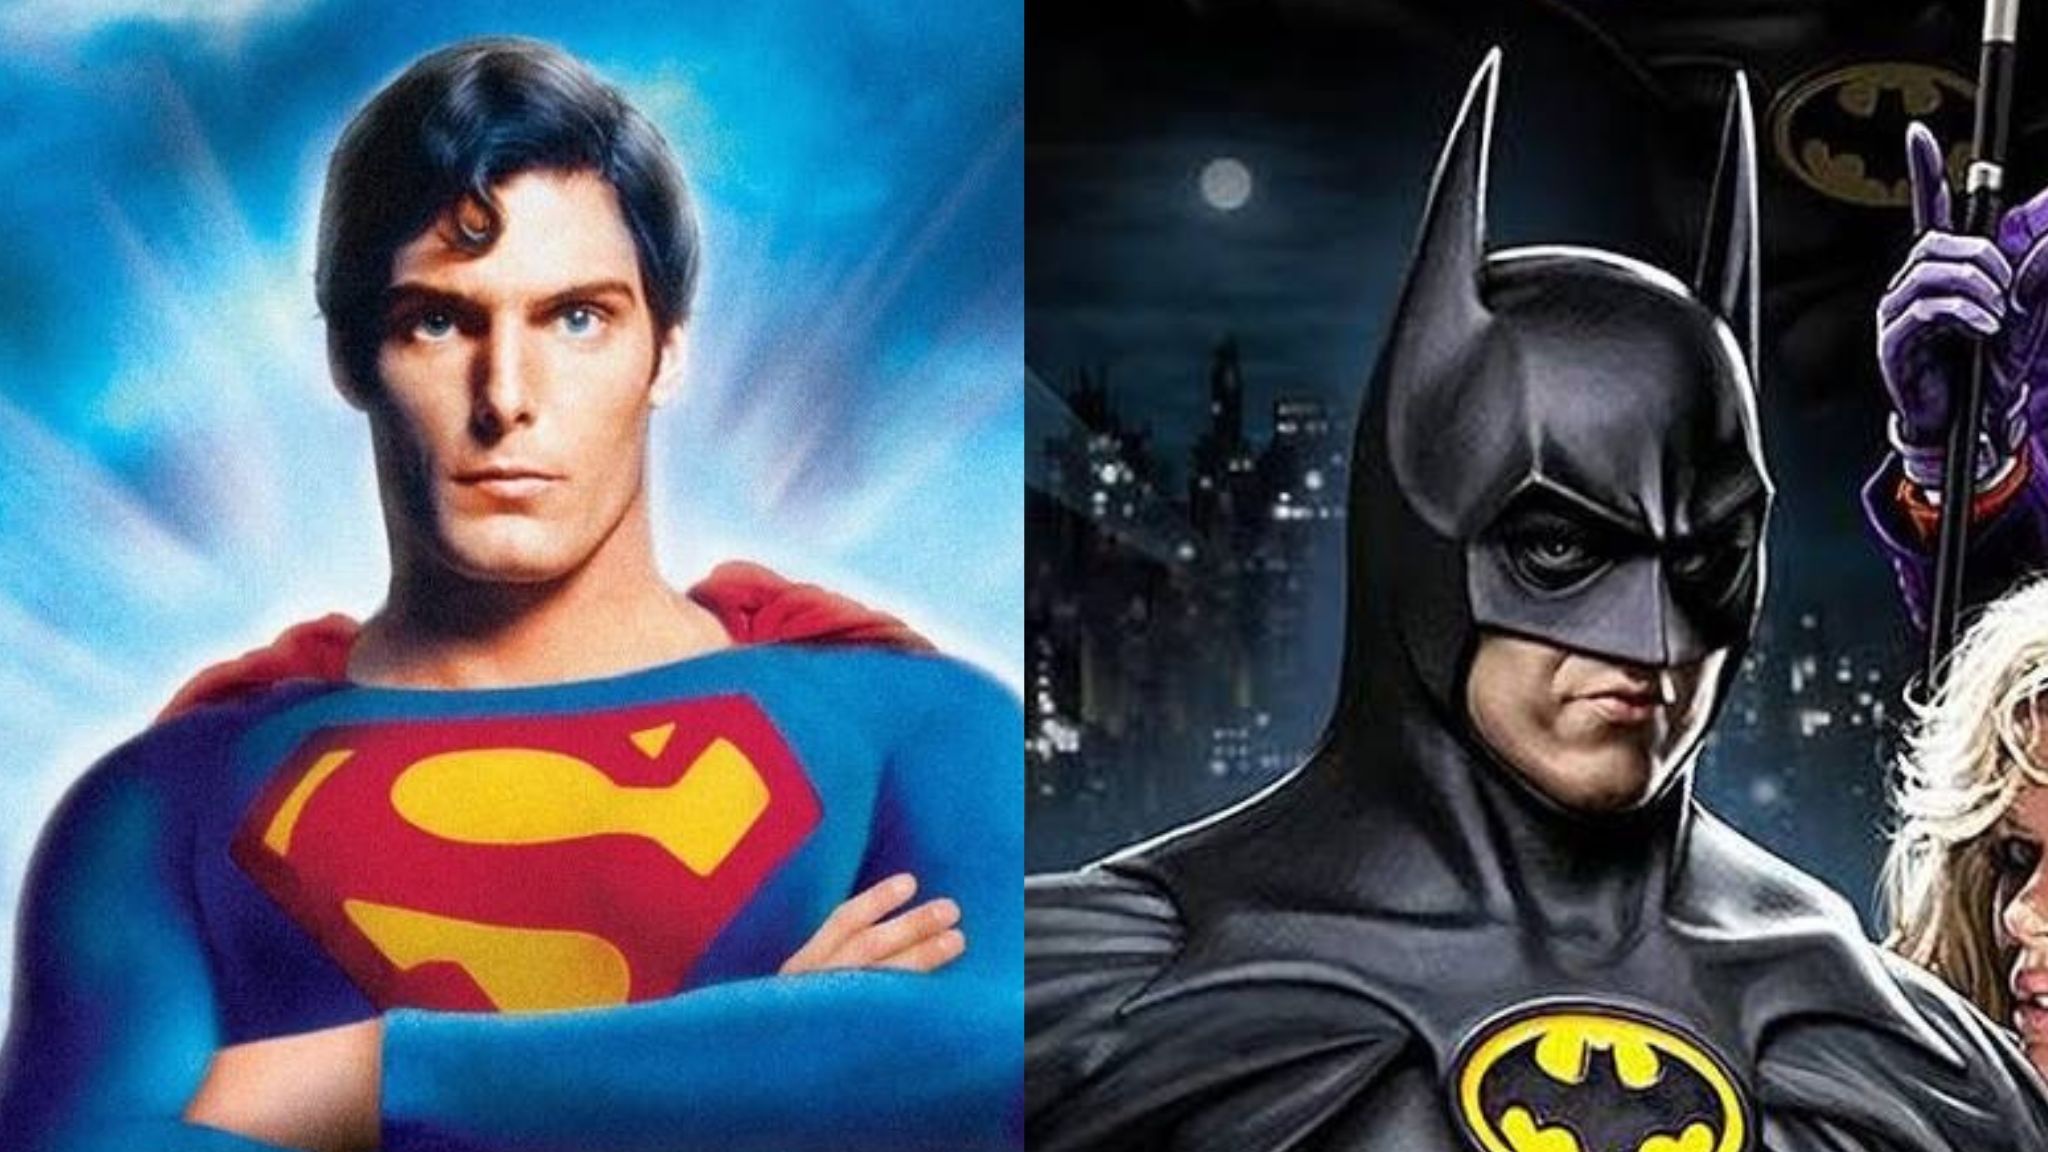 updated presale passcode for COMIXCON: Superman (1978) & Batman (1989) Double Feature presale tickets in Staten Island at St. George Theatre